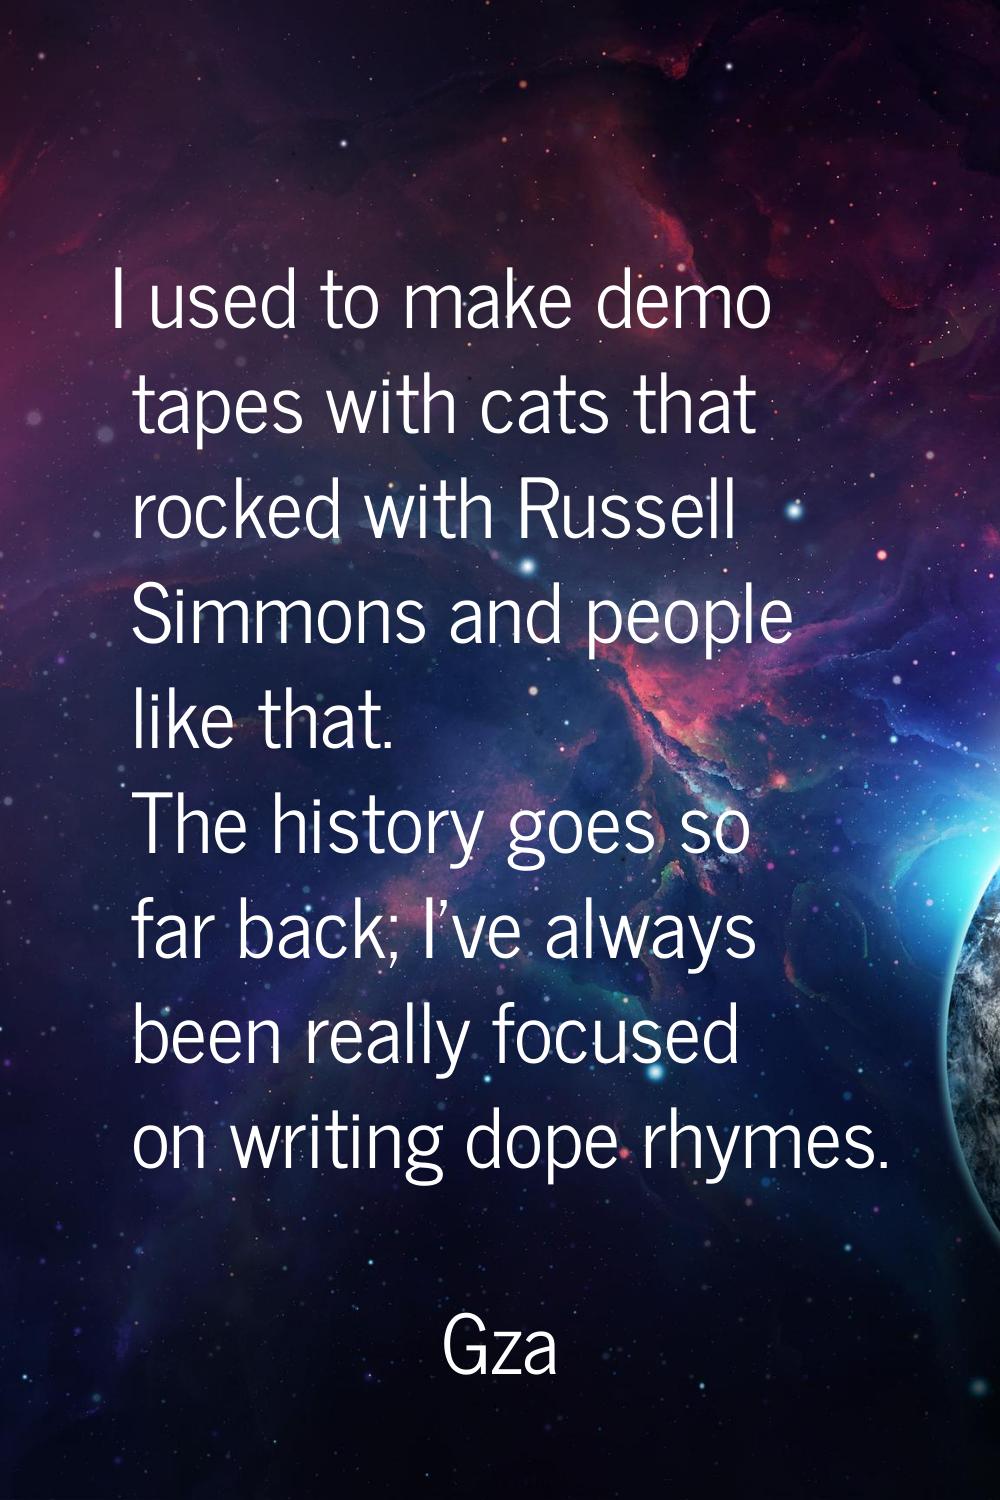 I used to make demo tapes with cats that rocked with Russell Simmons and people like that. The hist